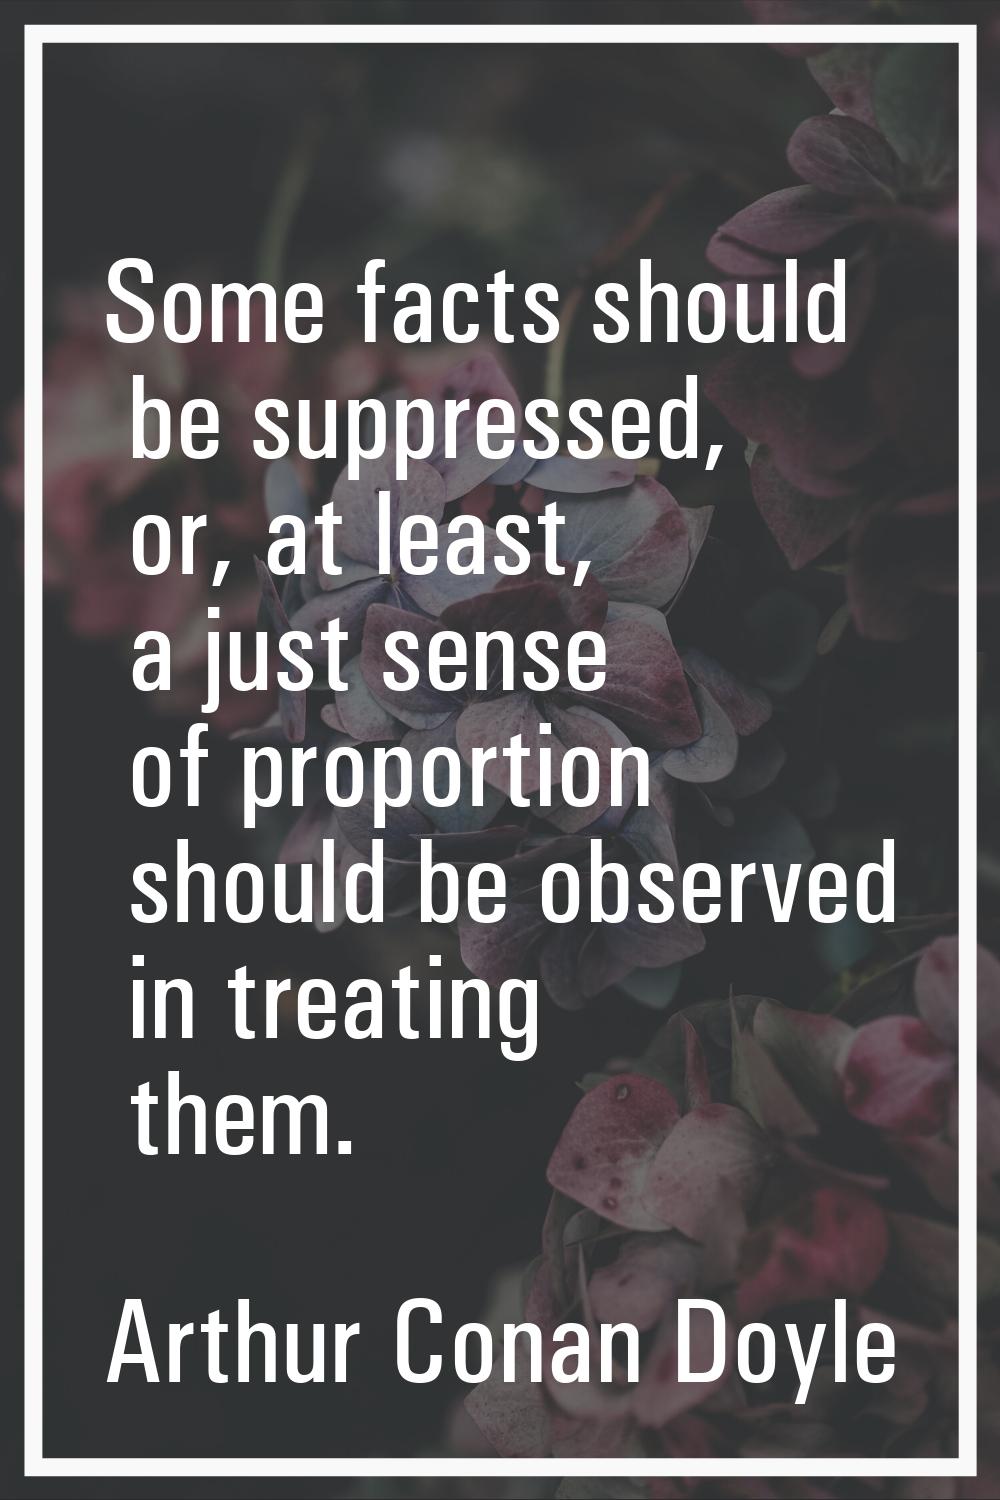 Some facts should be suppressed, or, at least, a just sense of proportion should be observed in tre